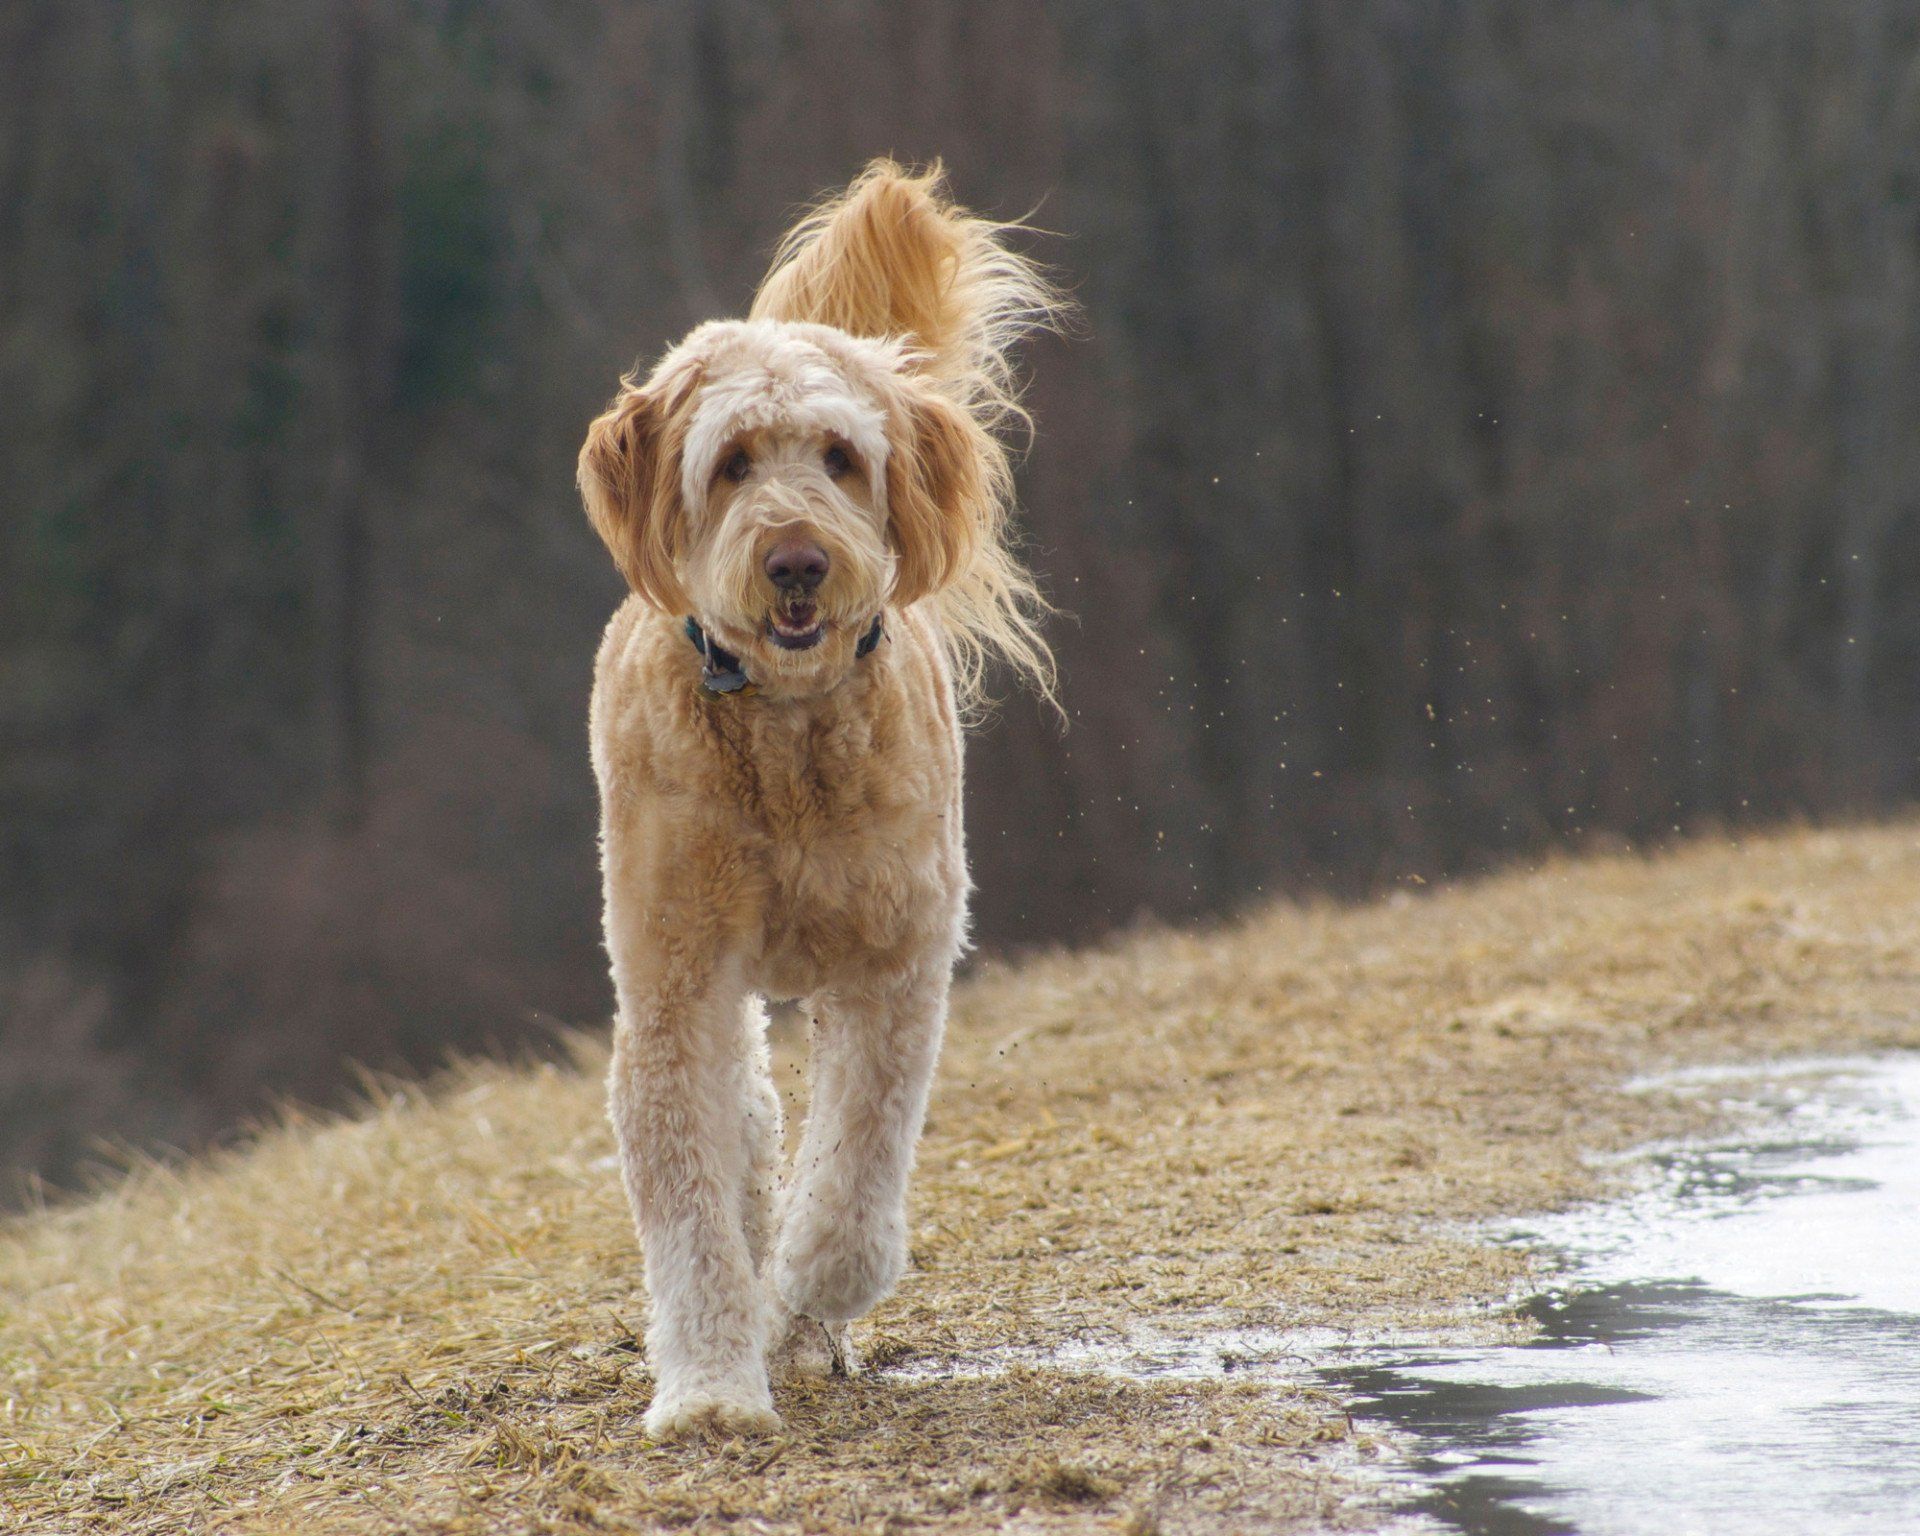 A happy goldendoodle dog, splashing through puddles on an off leash walk in spring.